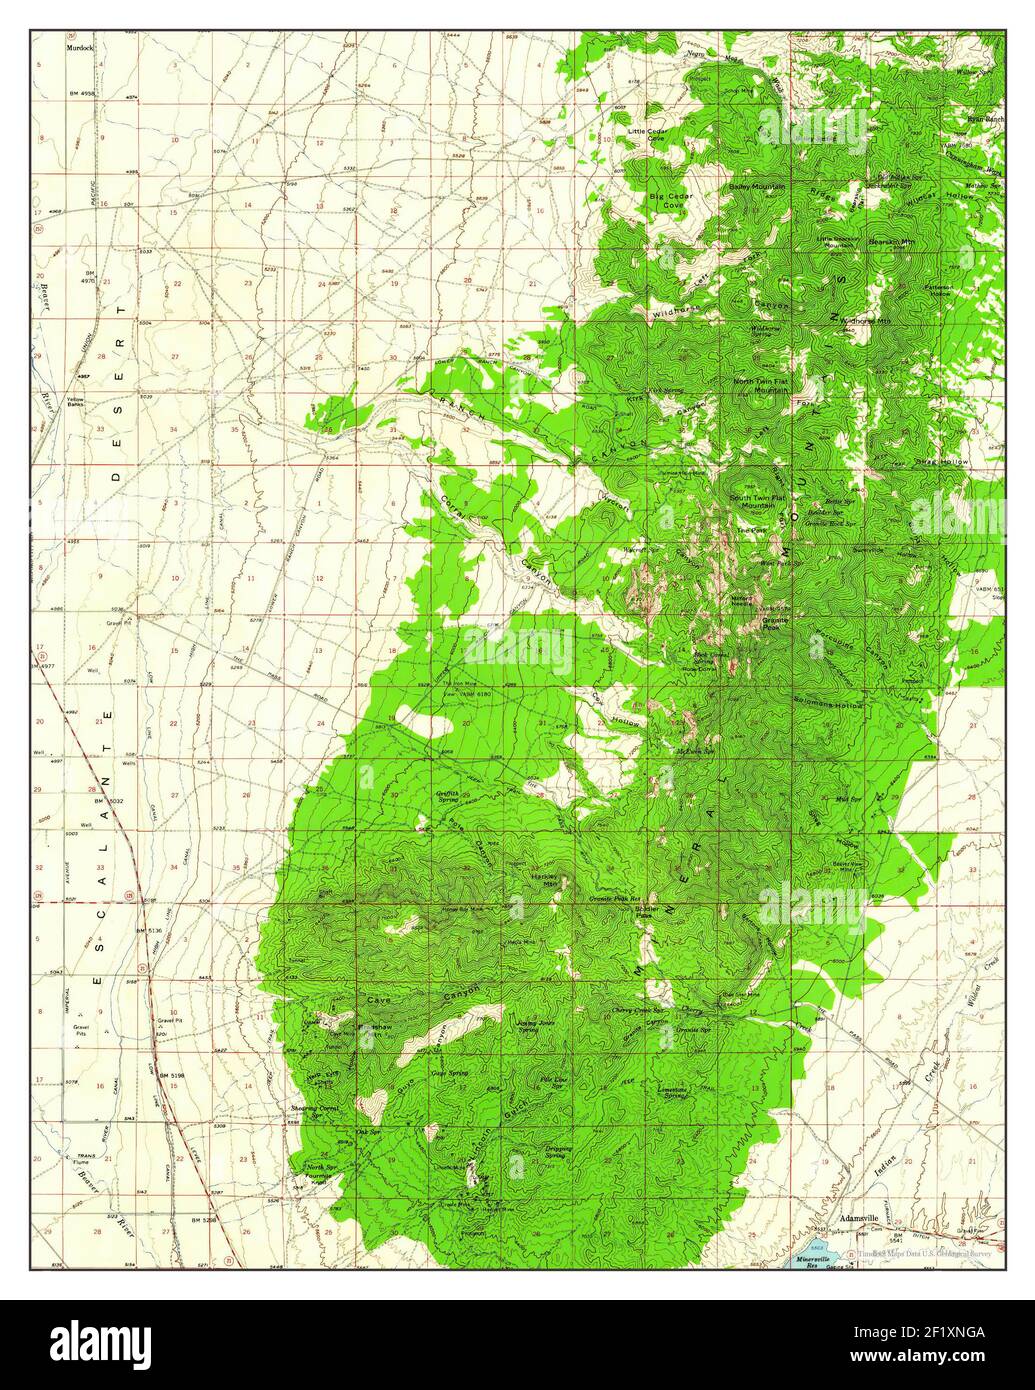 Adamsville, Utah, map 1958, 1:62500, United States of America by Timeless Maps, data U.S. Geological Survey Stock Photo